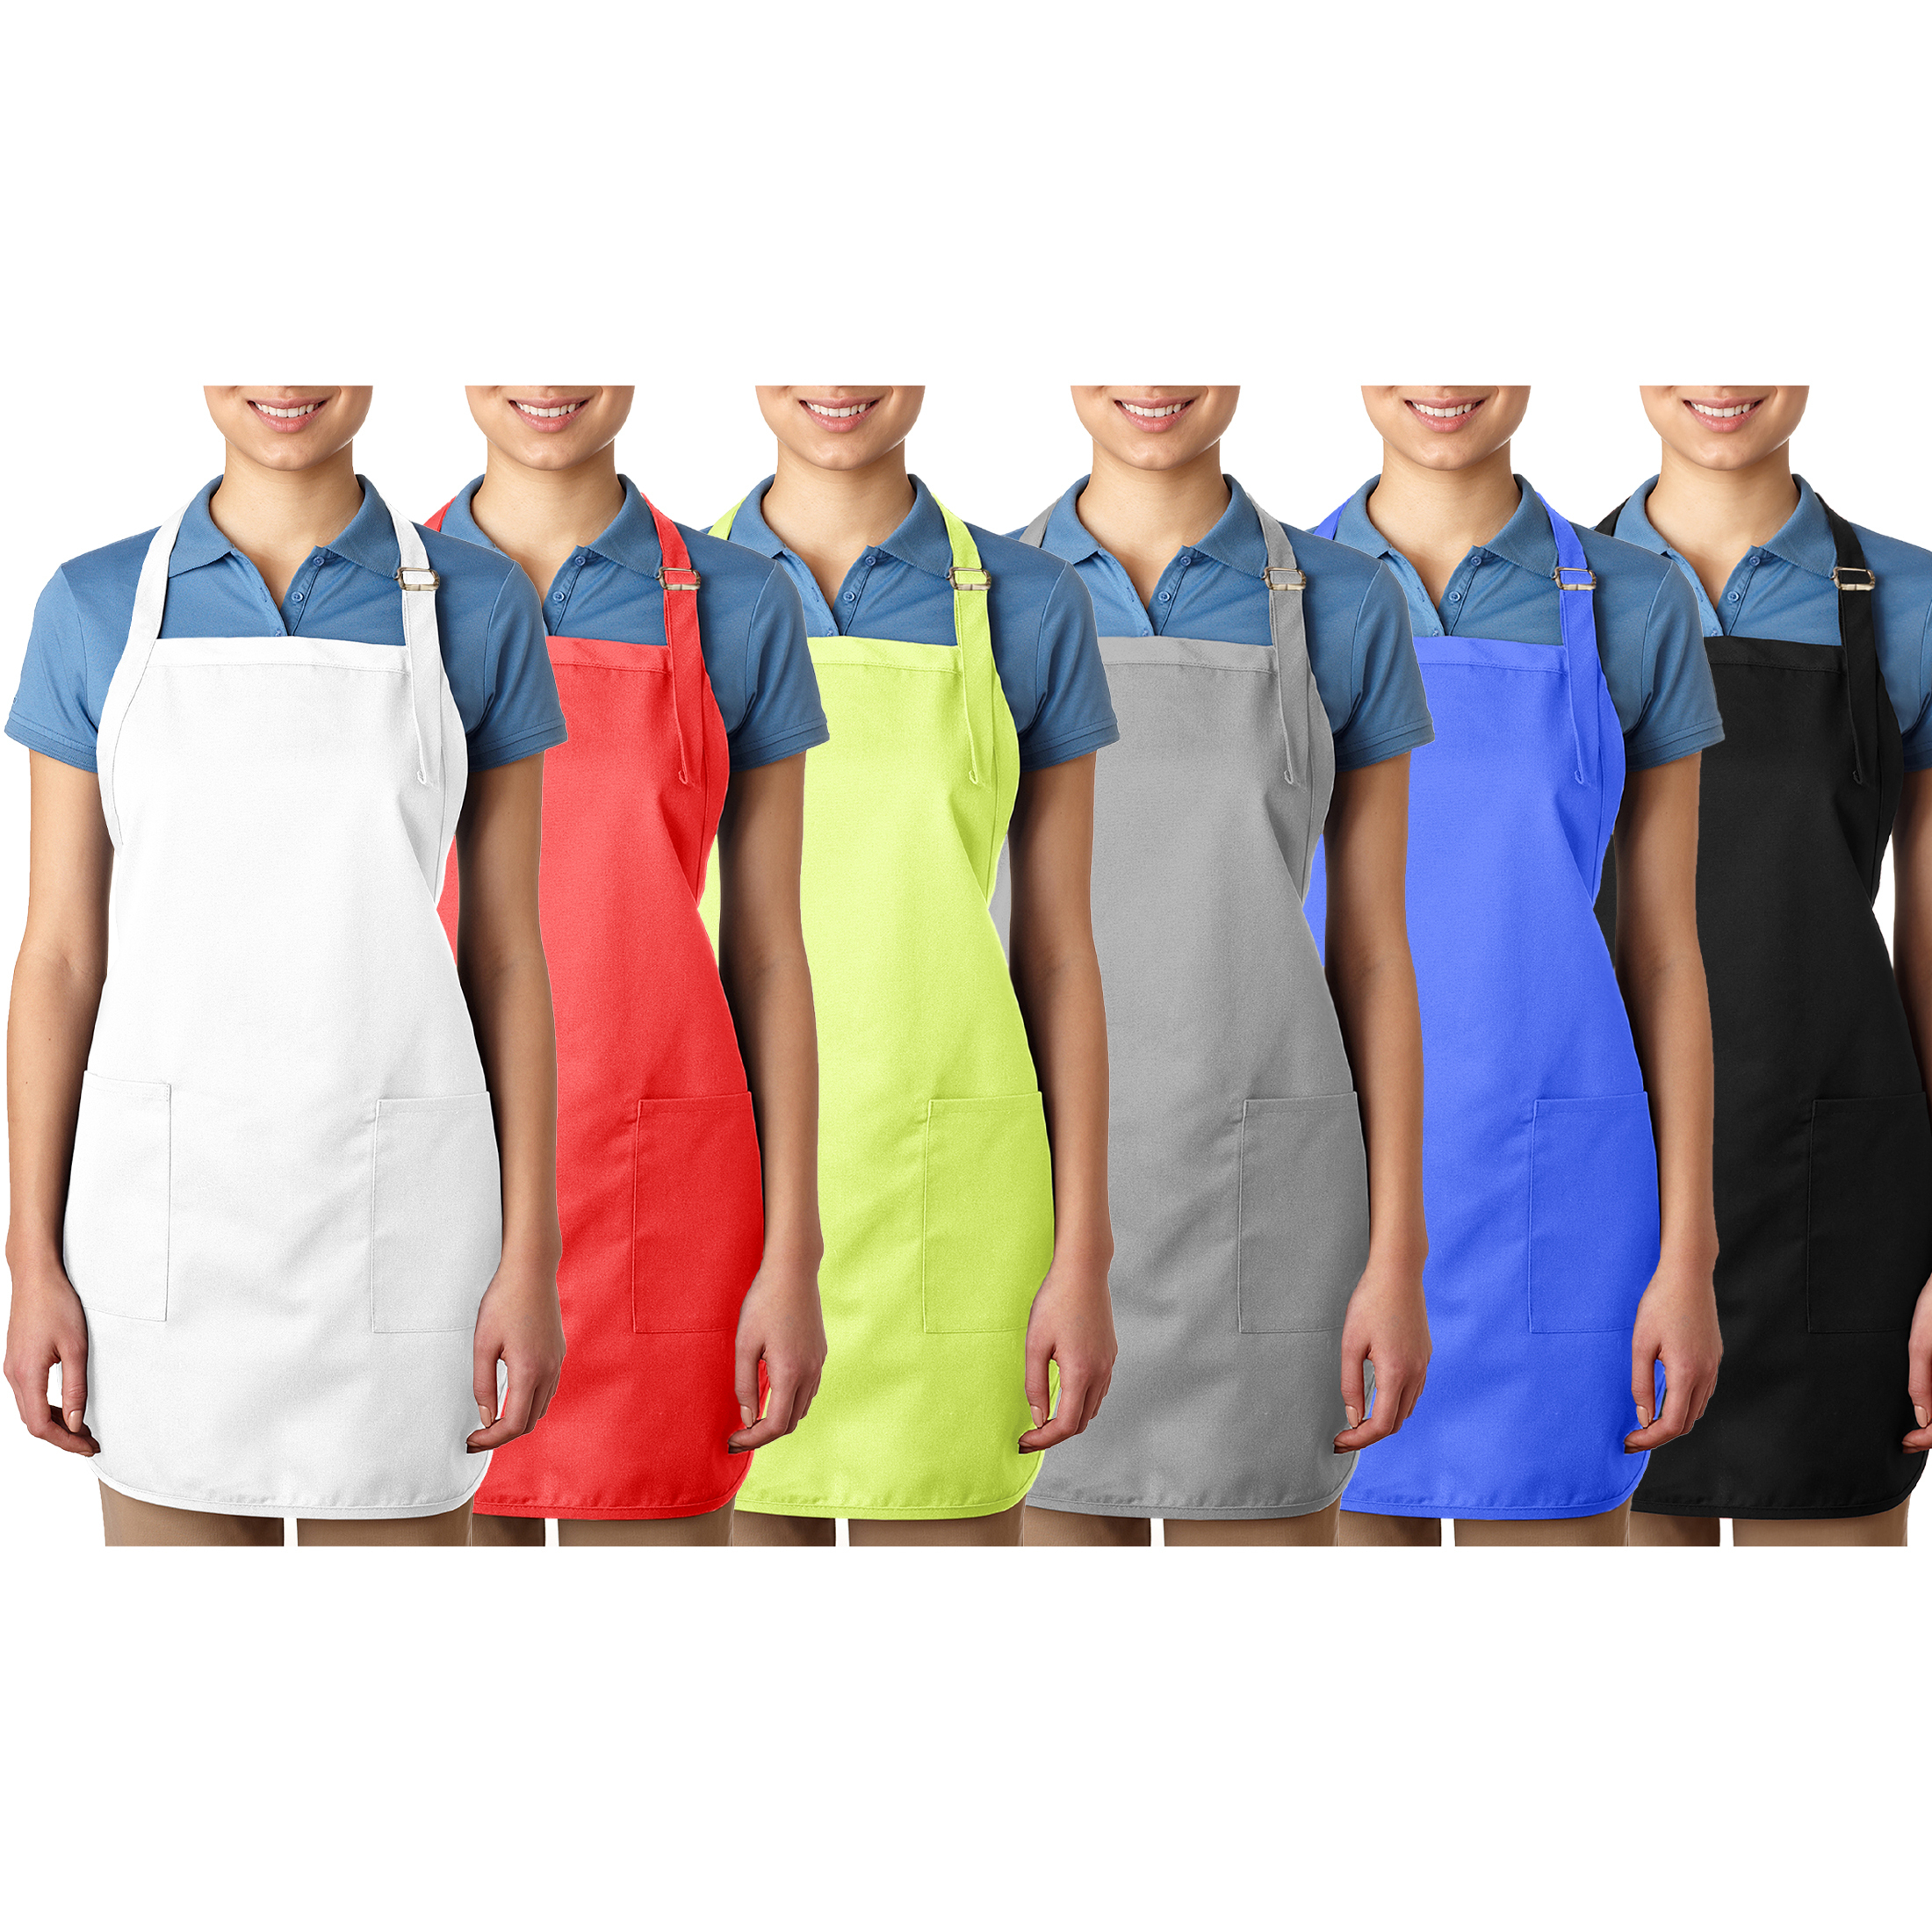 2-Pack: Unisex Deluxe Adjustable Bib Apron With Pockets